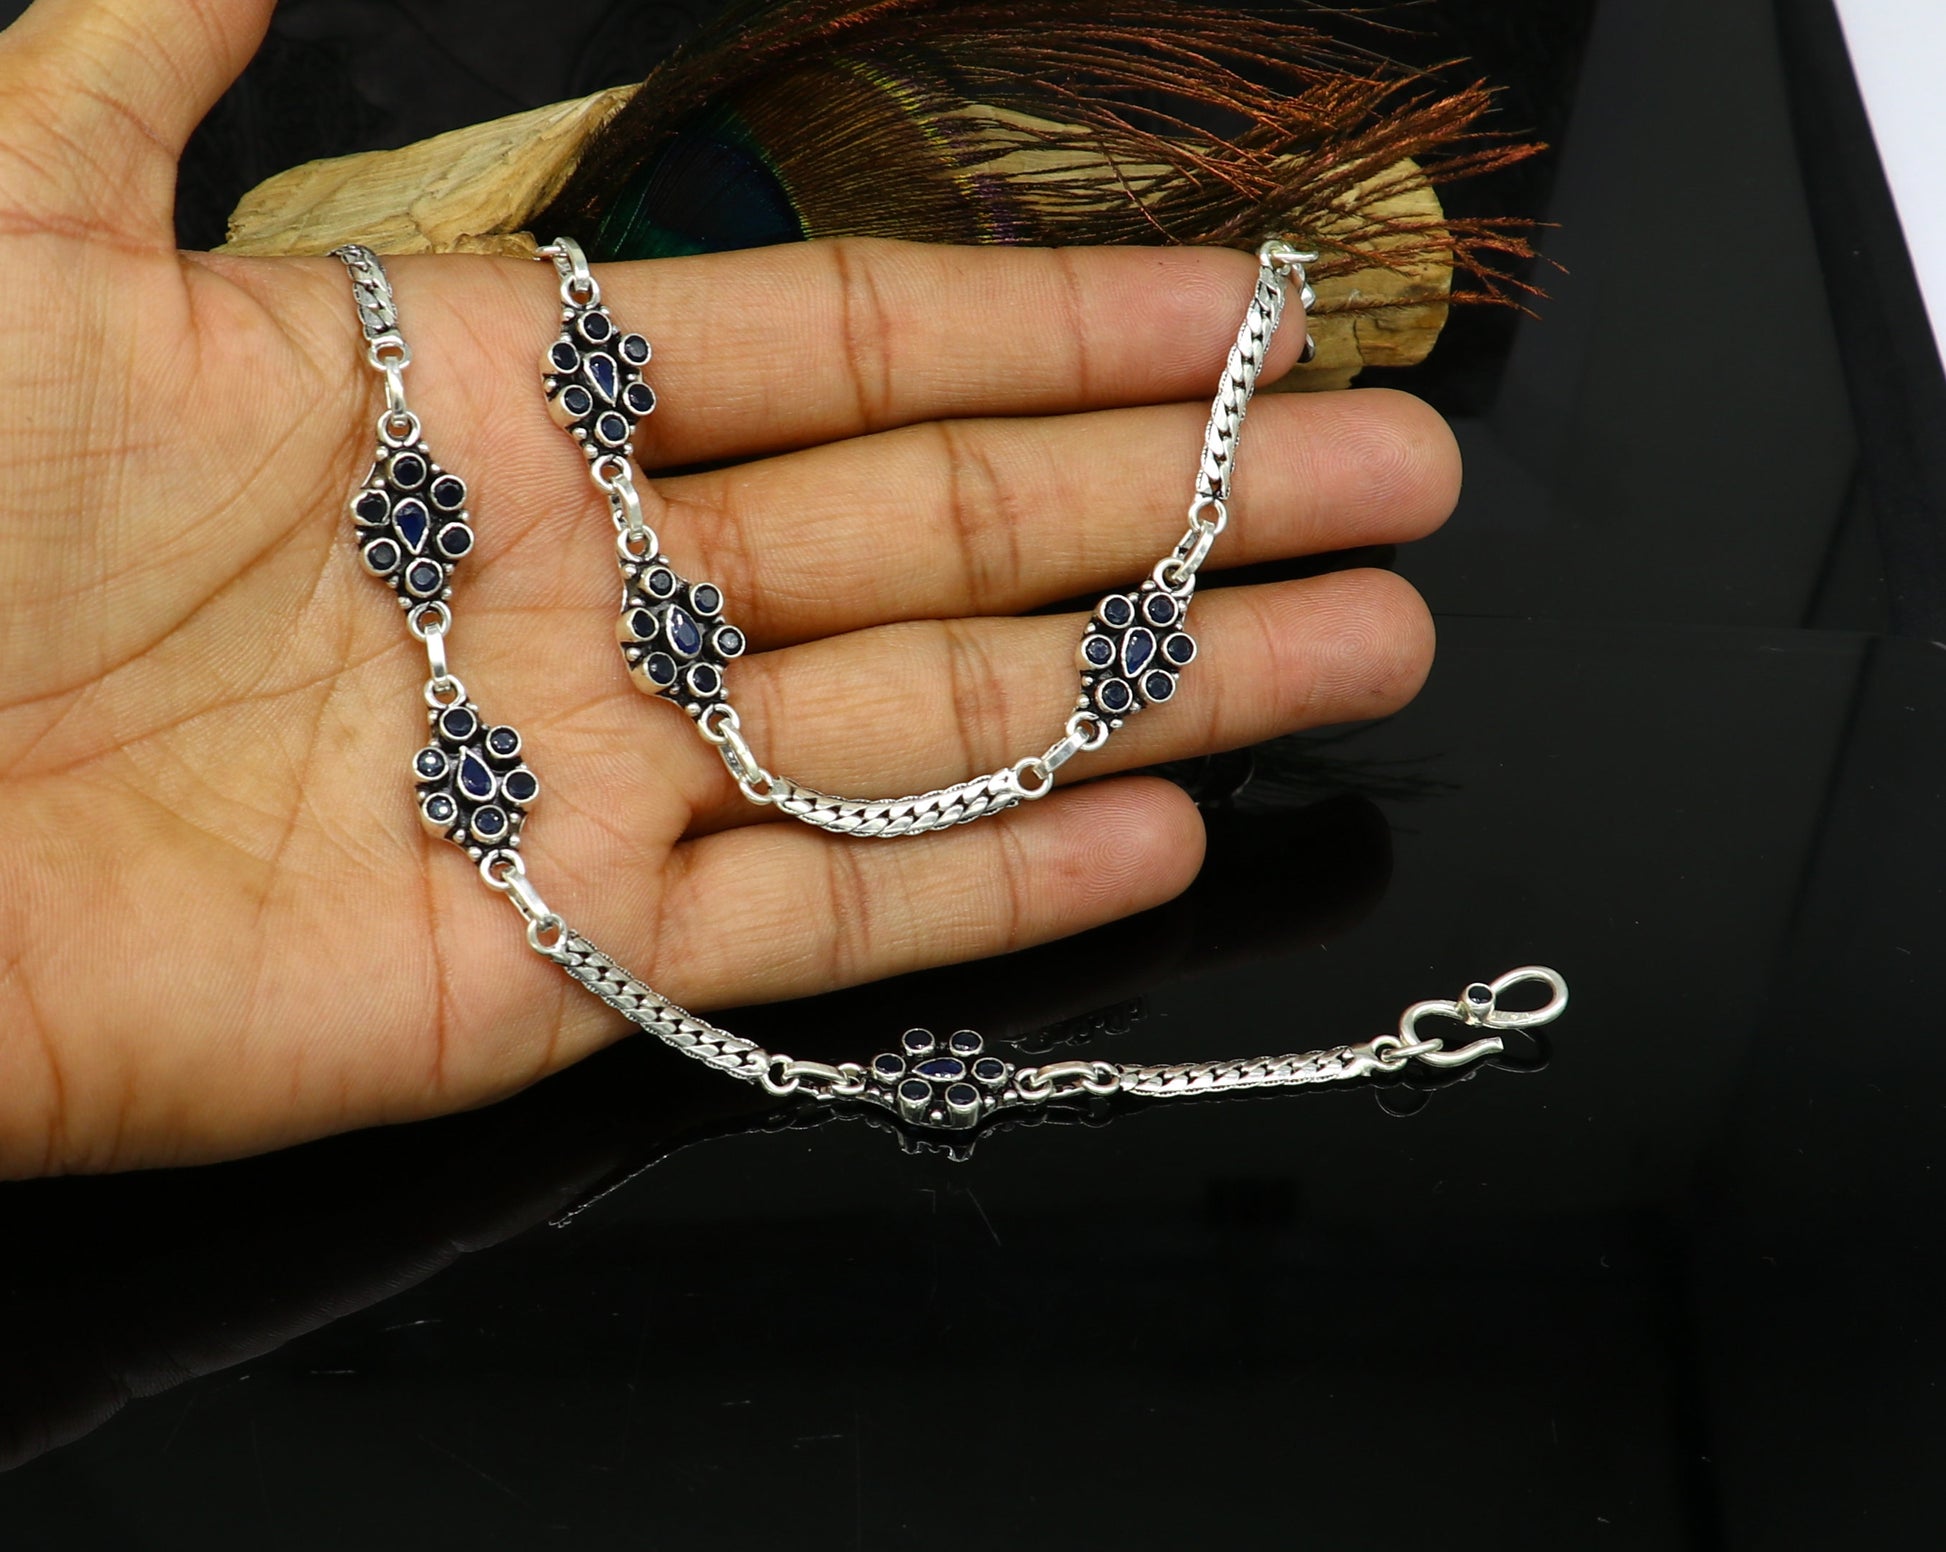 925 sterling silver handmade stylish designer anklets bracelet, best gifting anklets, tribal belly dance jewelry women's accessories ank52 - TRIBAL ORNAMENTS